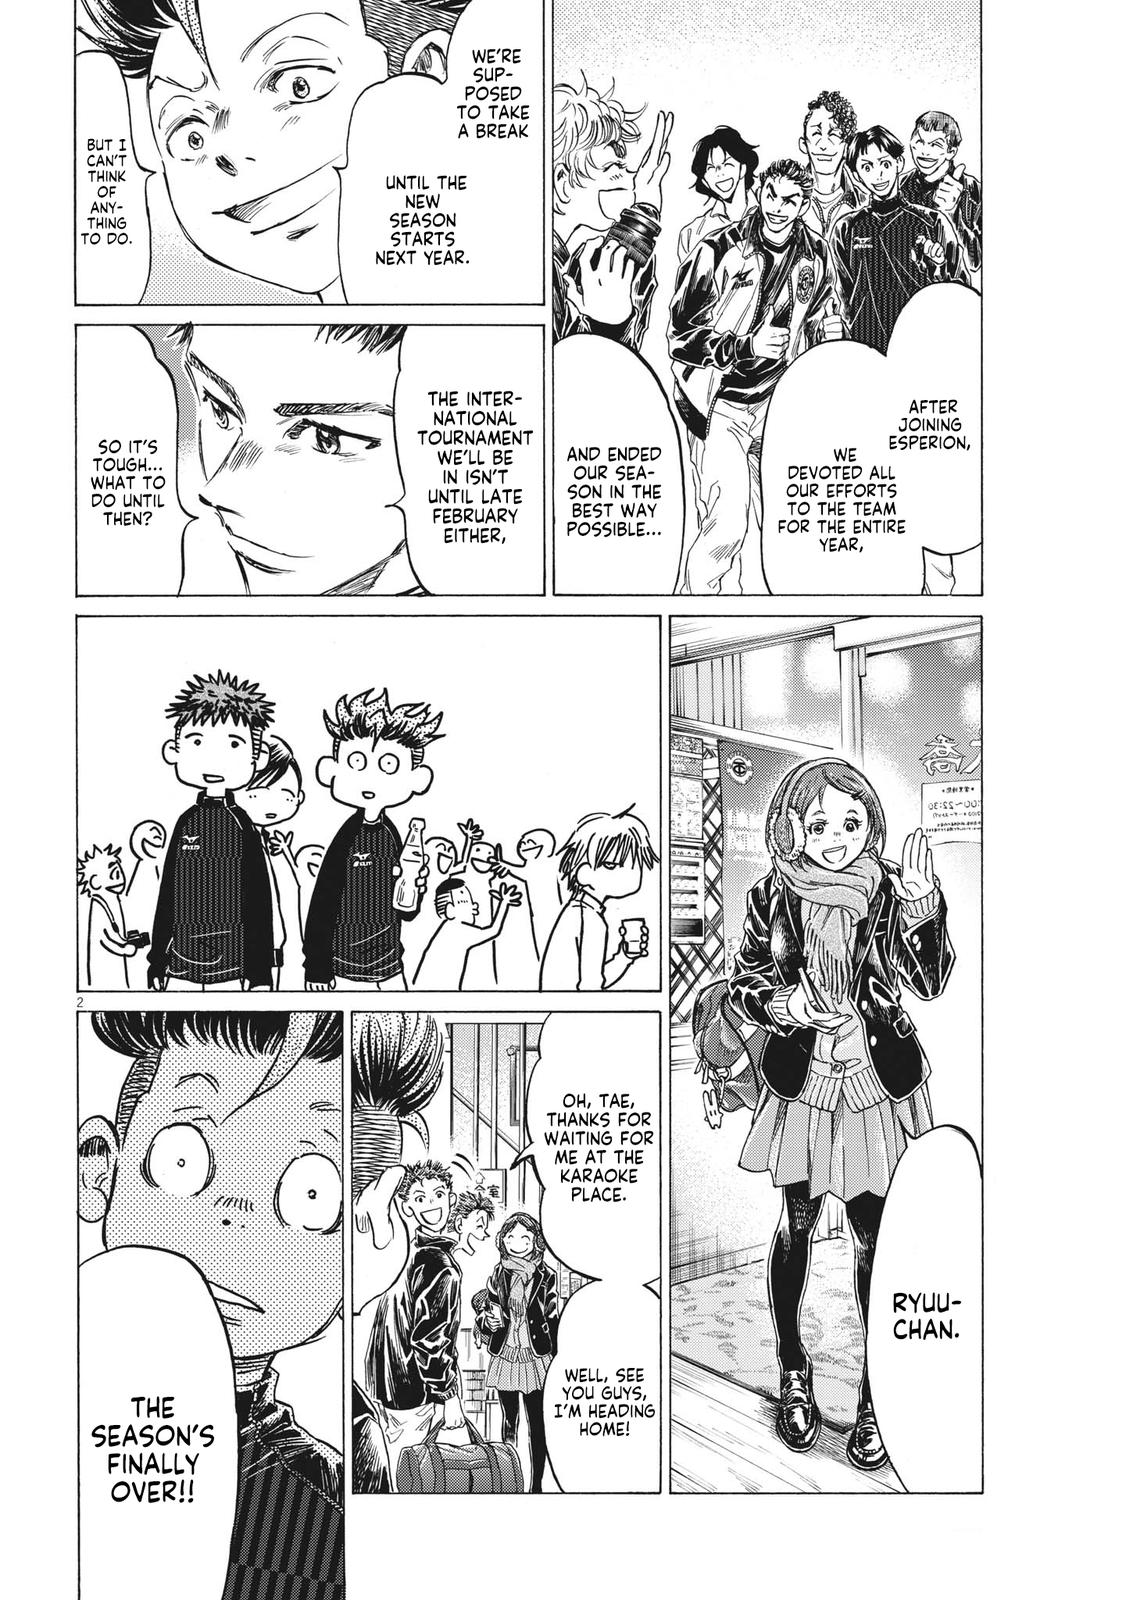 Ao Ashi, Chapter 345  TcbScans Net - TCBscans - Free Manga Online in High  Quality